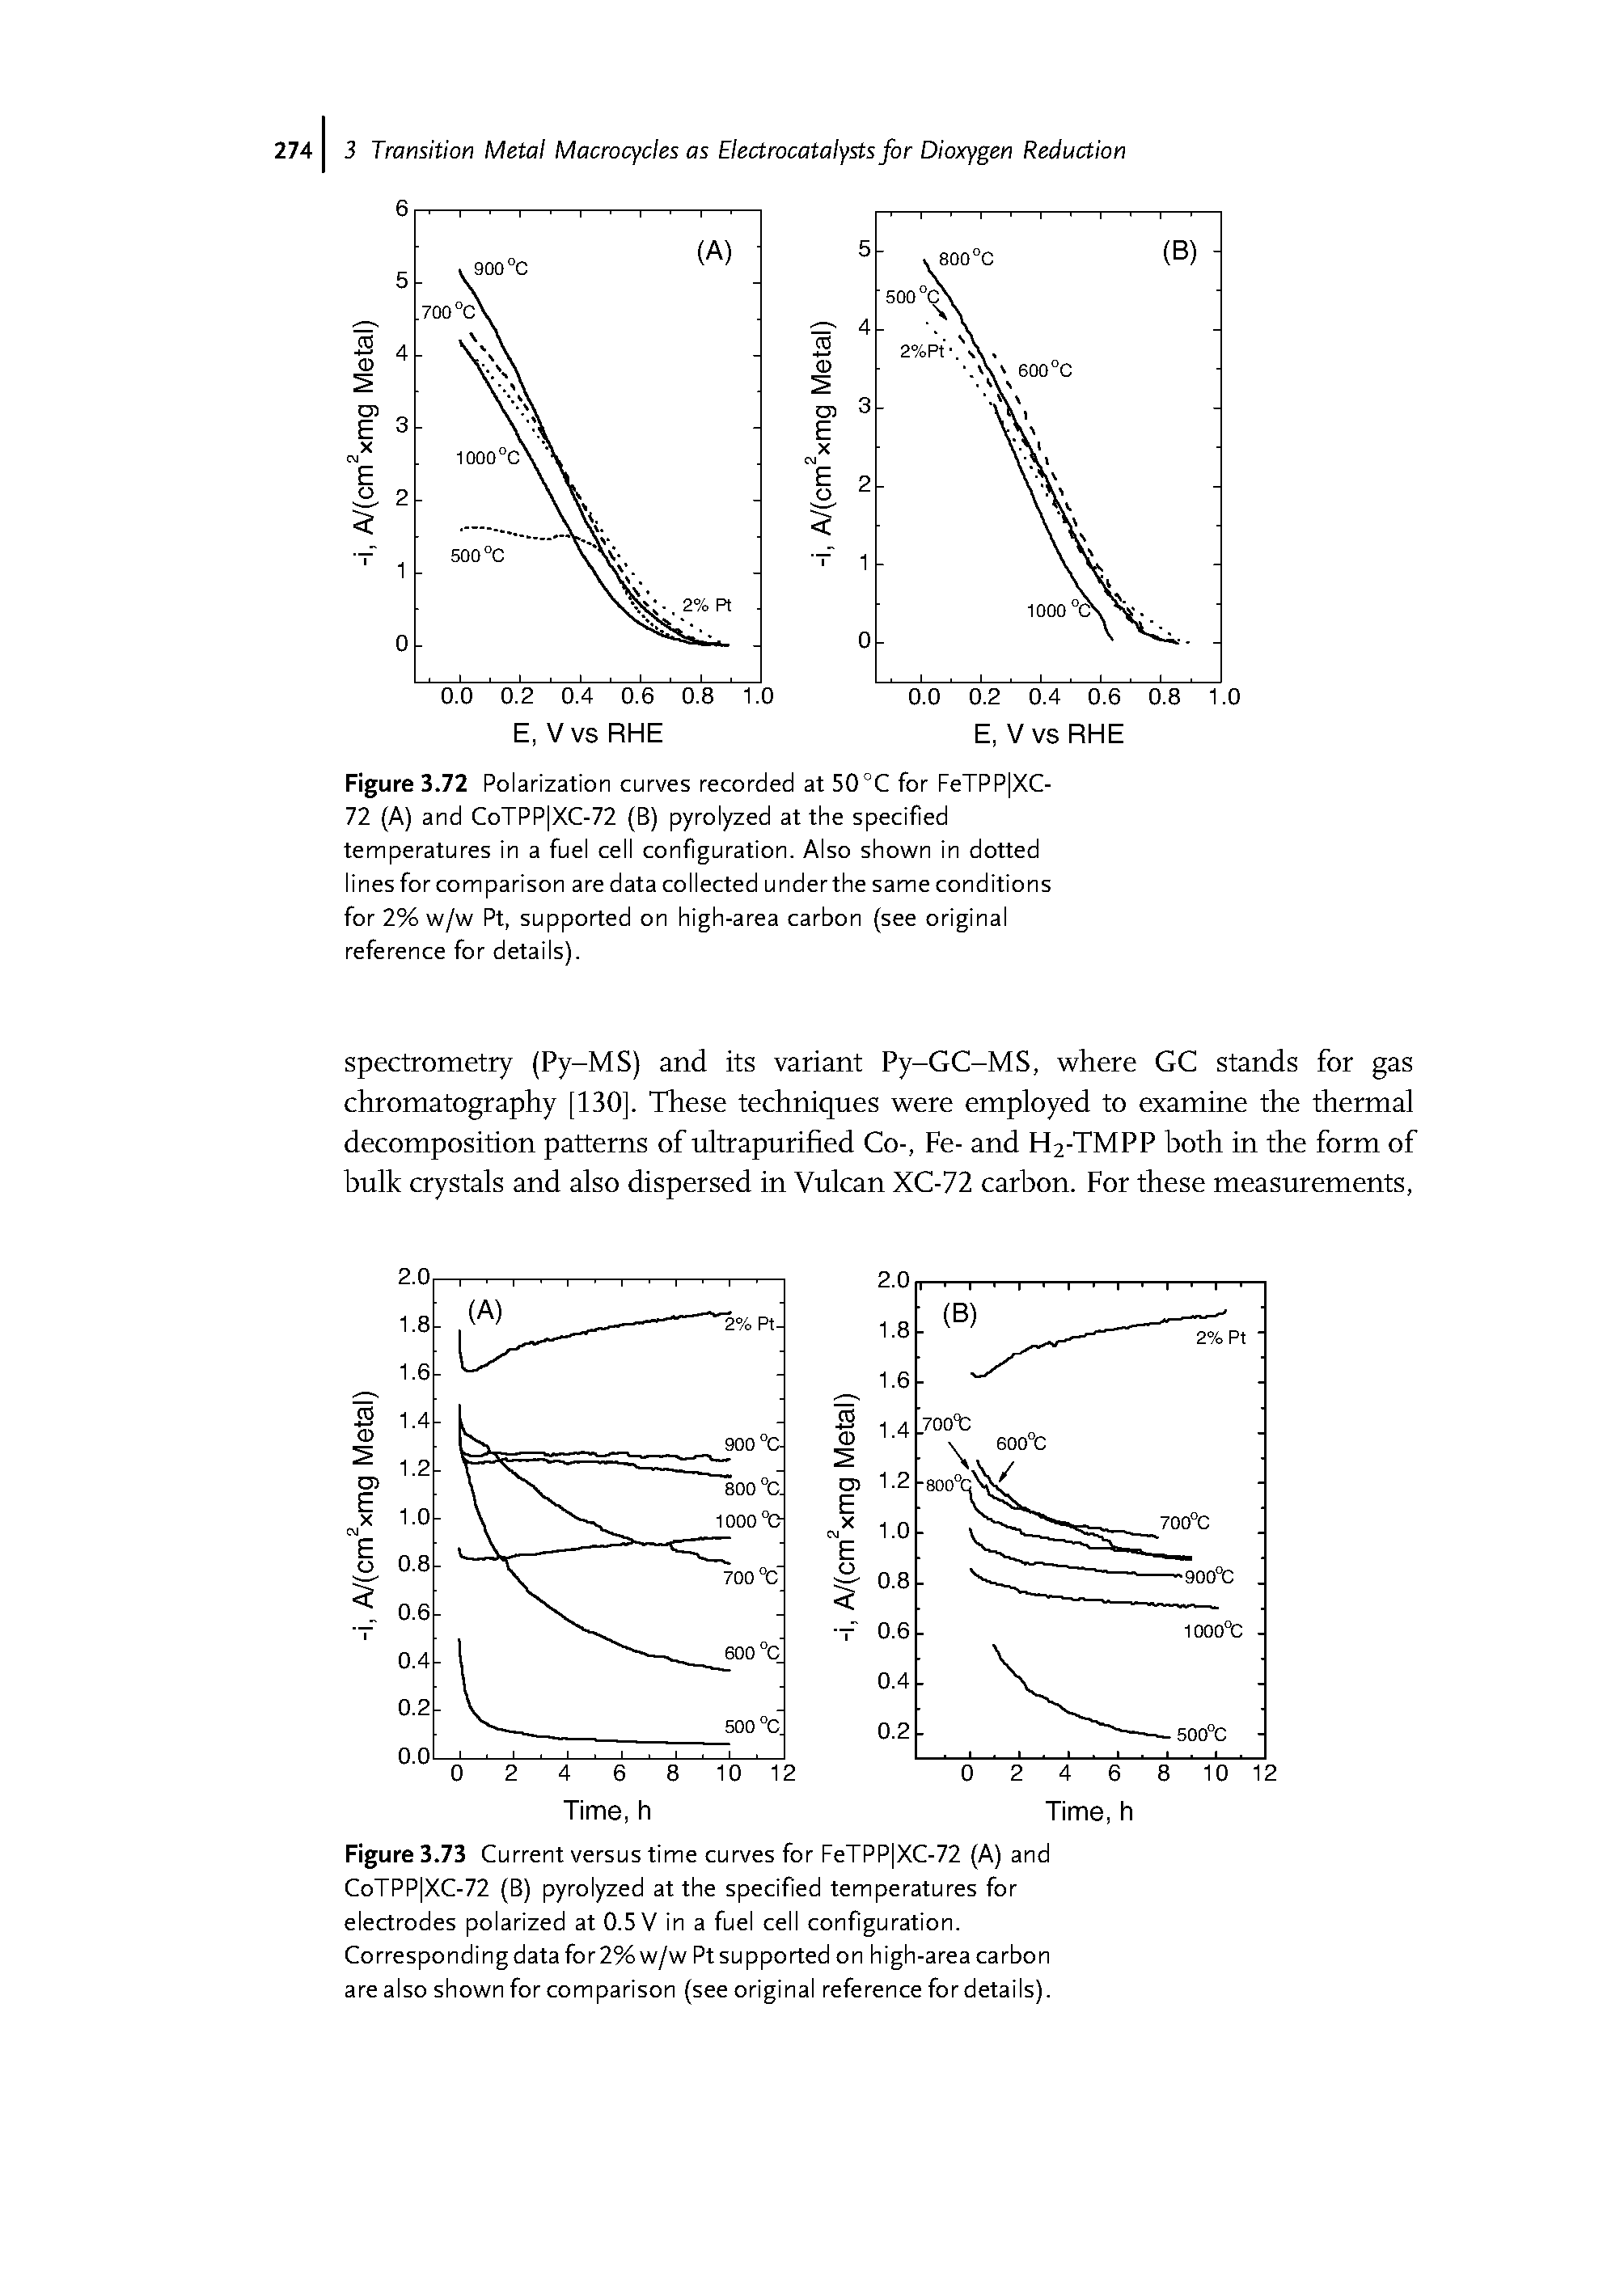 Figure 3.72 Polarization curves recorded at 50°C for FeTPP XC-72 (A) and CoTPP XC-72 (B) pyrolyzed at the specified temperatures in a fuel cell configuration. Also shown in dotted lines for comparison are data collected under the same conditions for 2% w/w Pt, supported on high-area carbon (see original reference for details).